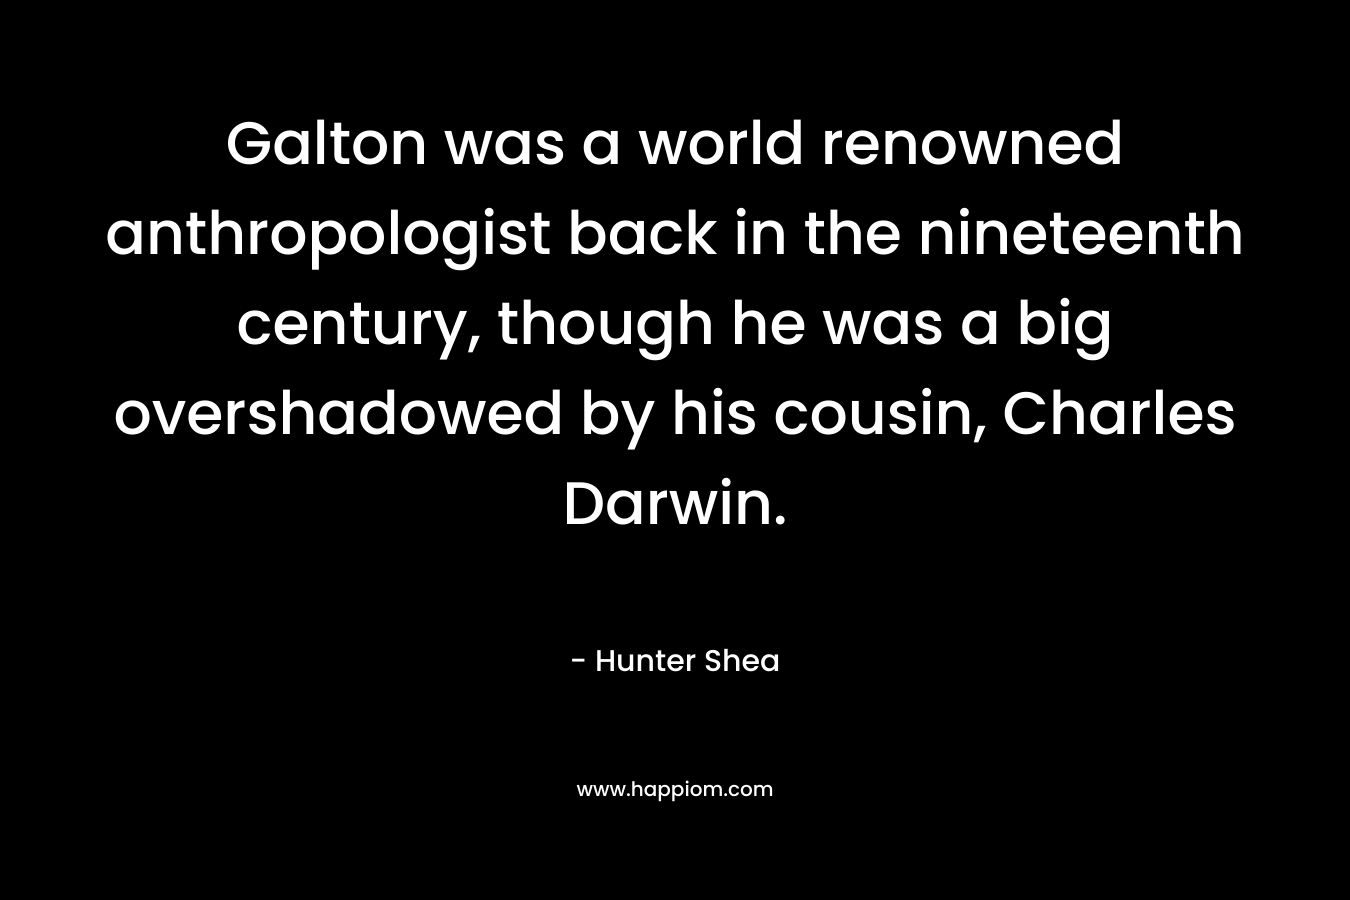 Galton was a world renowned anthropologist back in the nineteenth century, though he was a big overshadowed by his cousin, Charles Darwin. – Hunter Shea